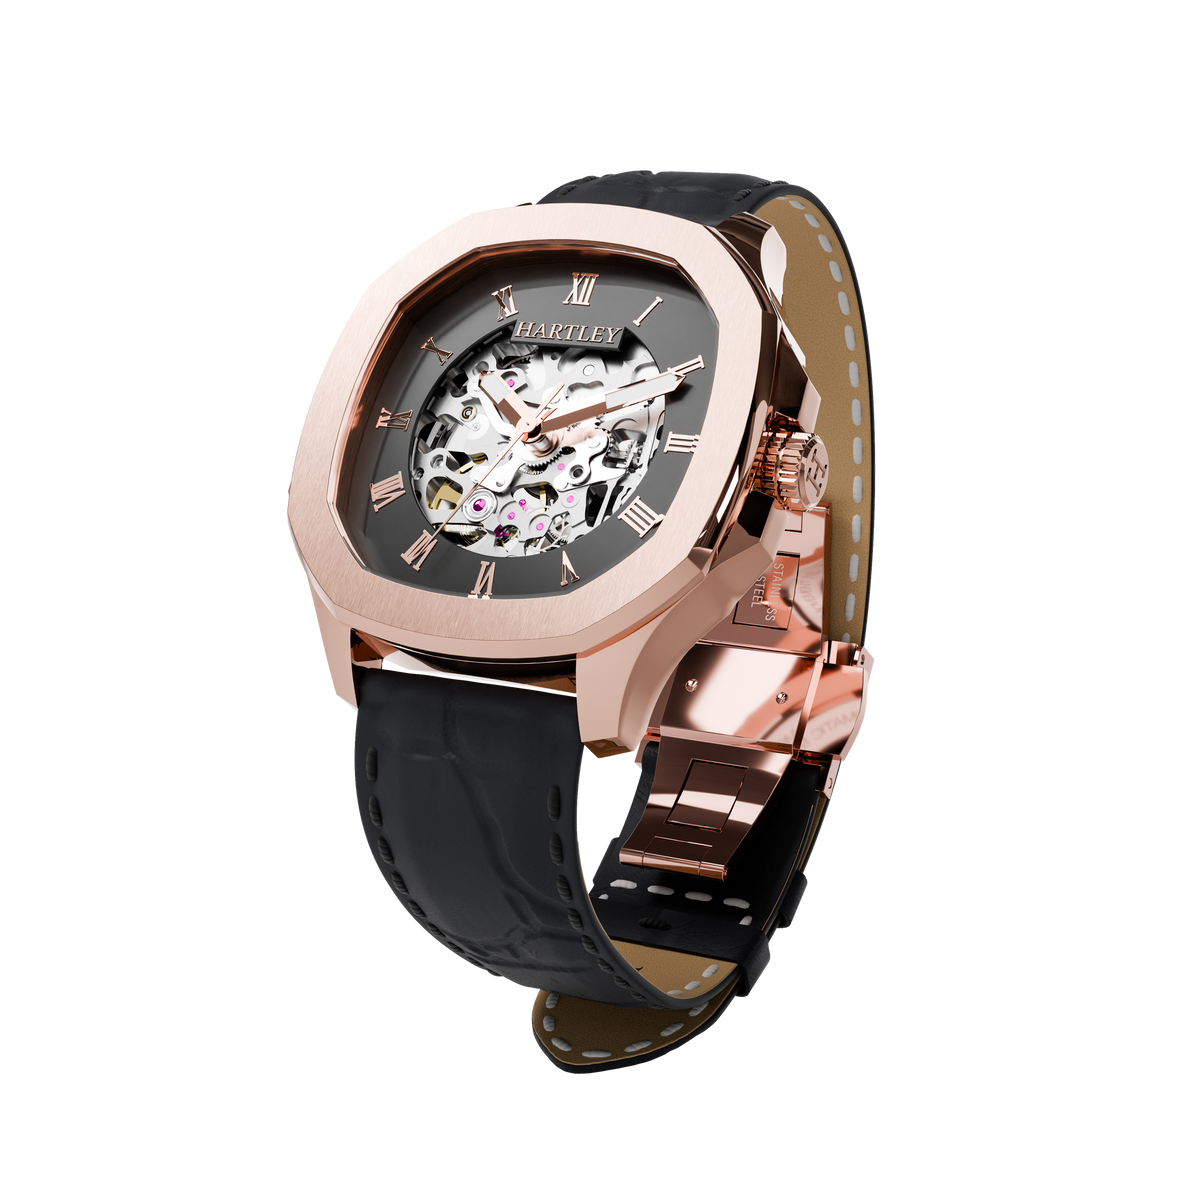 HARTLEY LEGACY ROSE GOLD BLACK CROC ANGLED VIEW